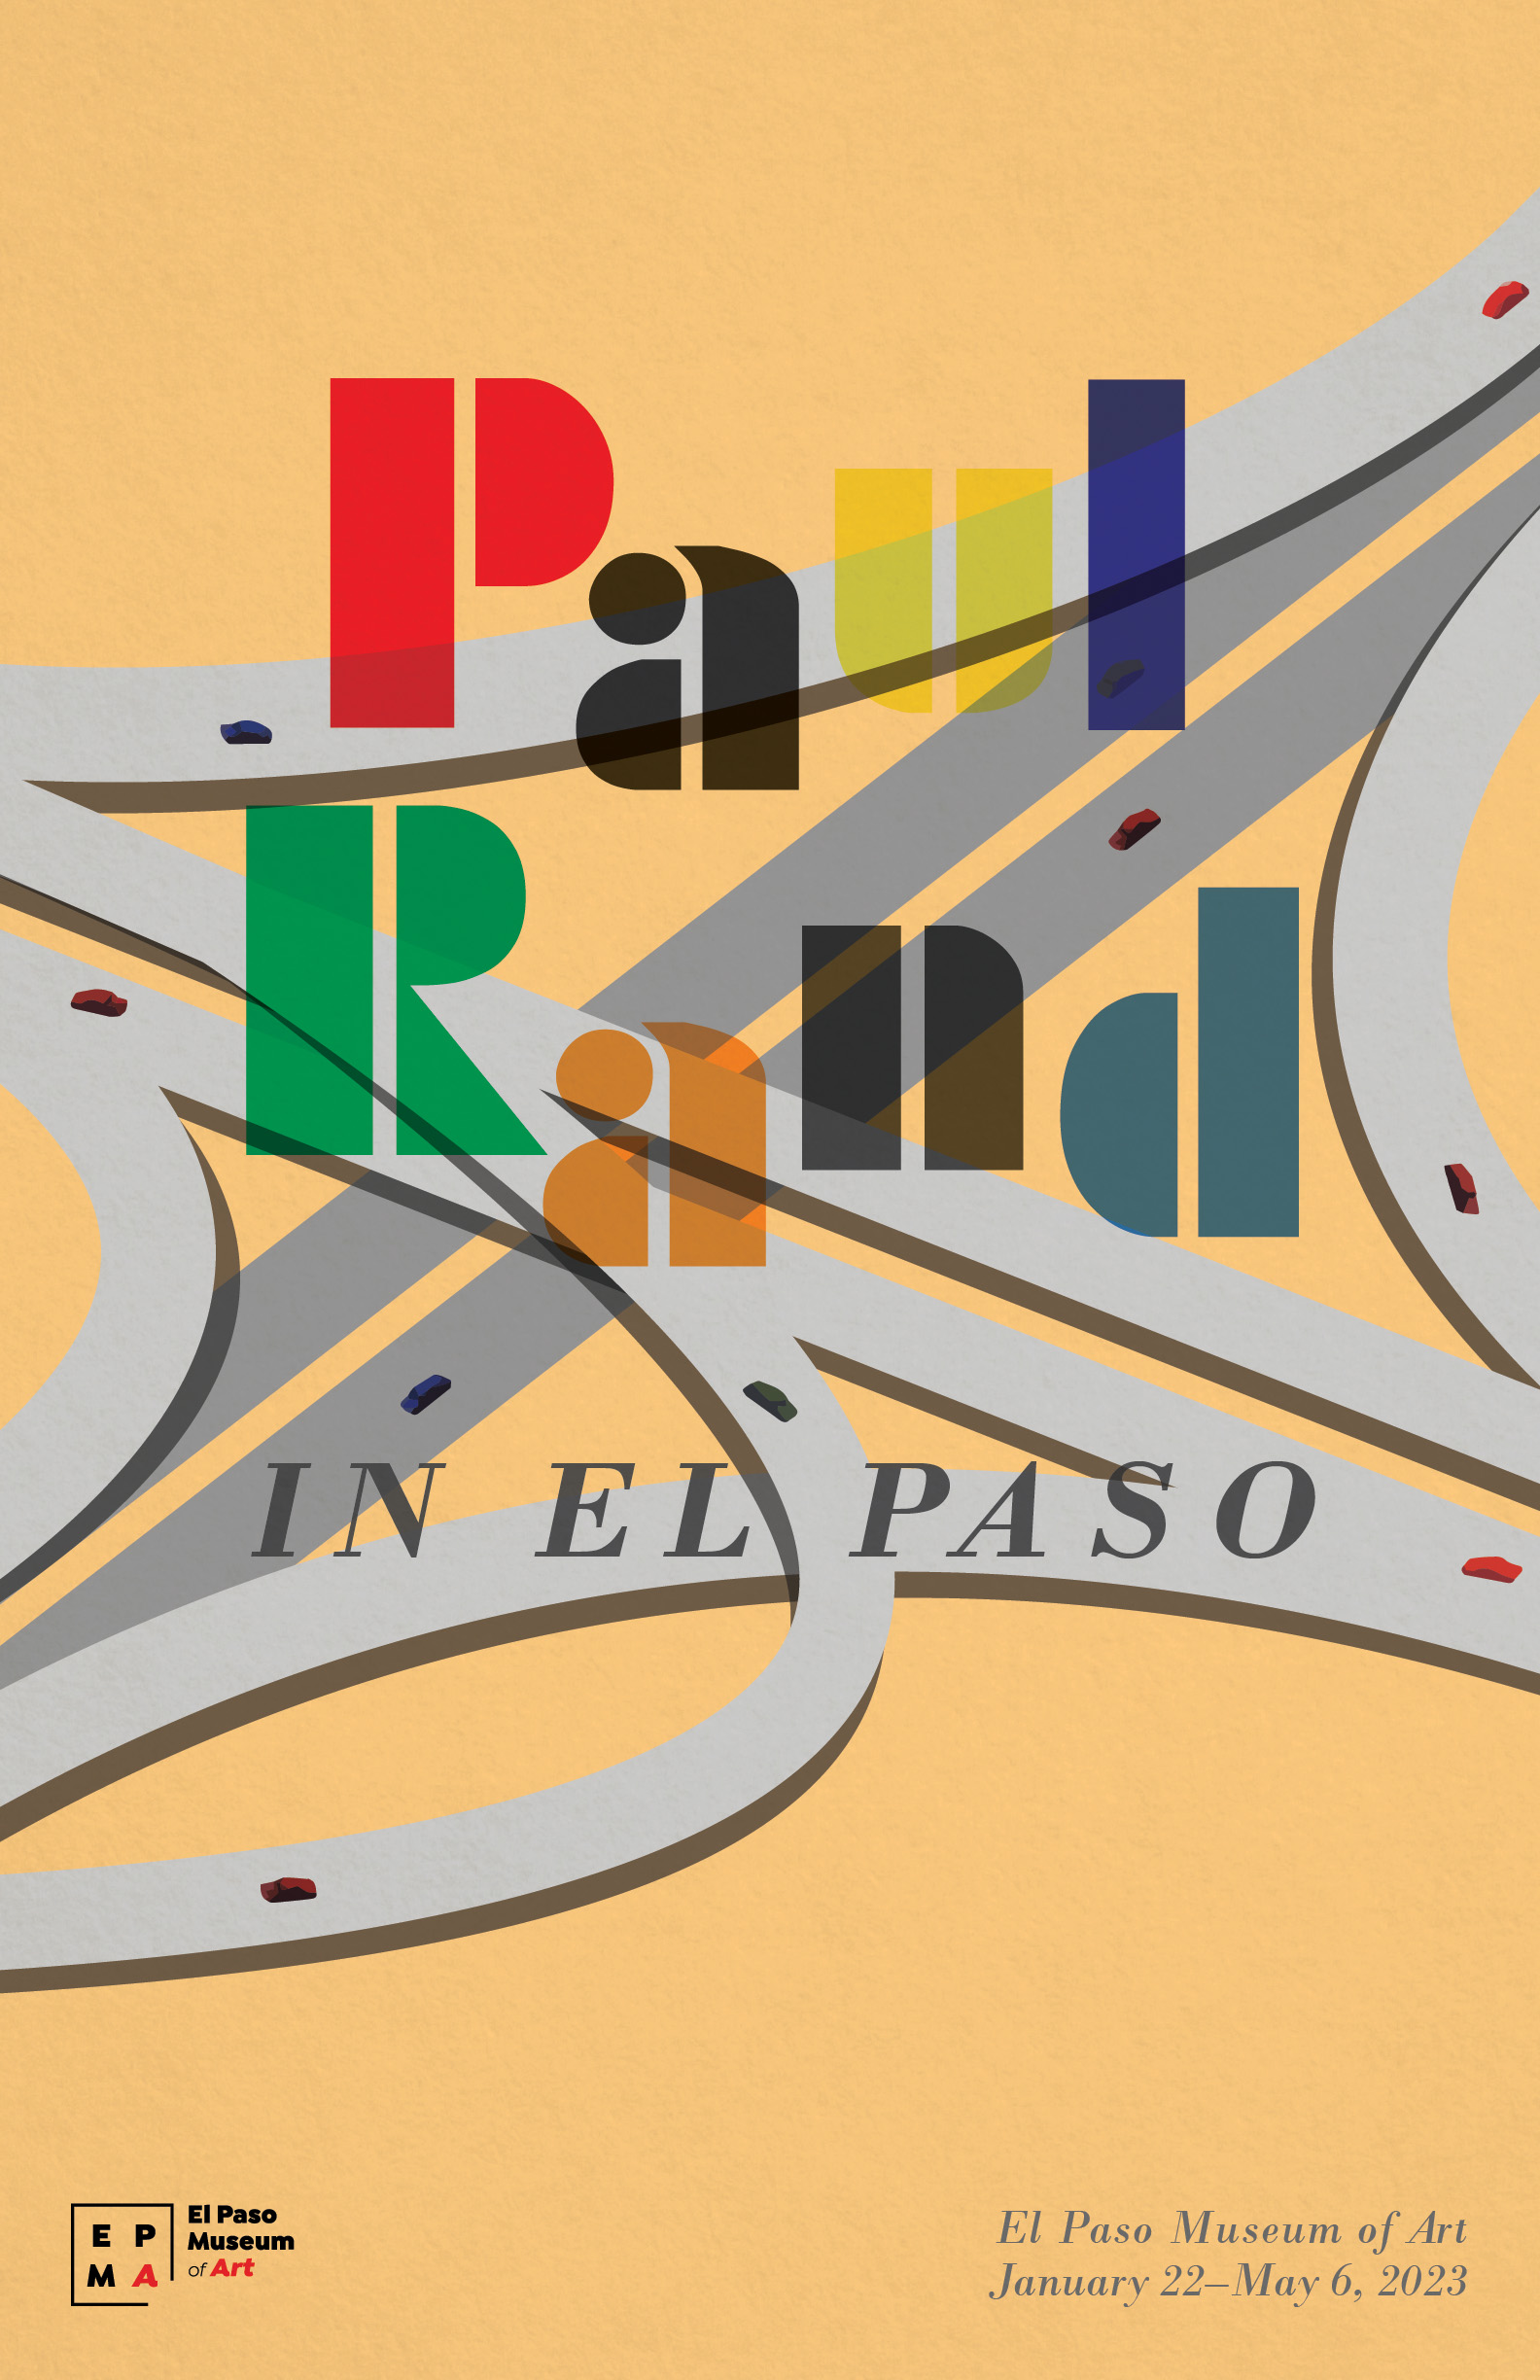 Paul Rand in El Paso promotional design with spaghetti bowl in center.